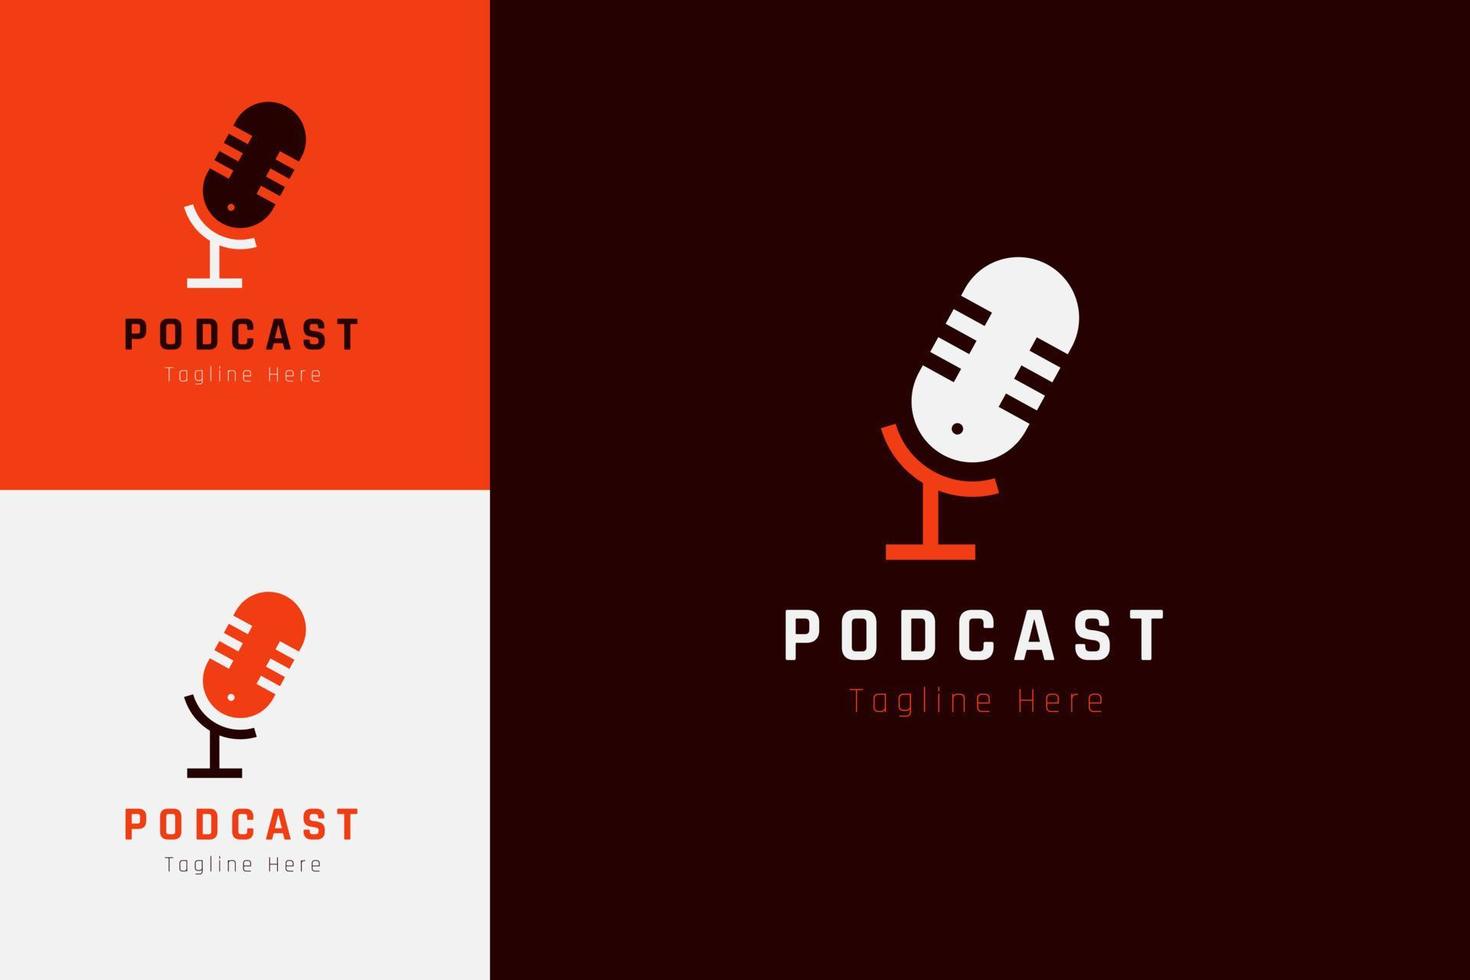 Set of podcast microphone logo vector design template with different color style